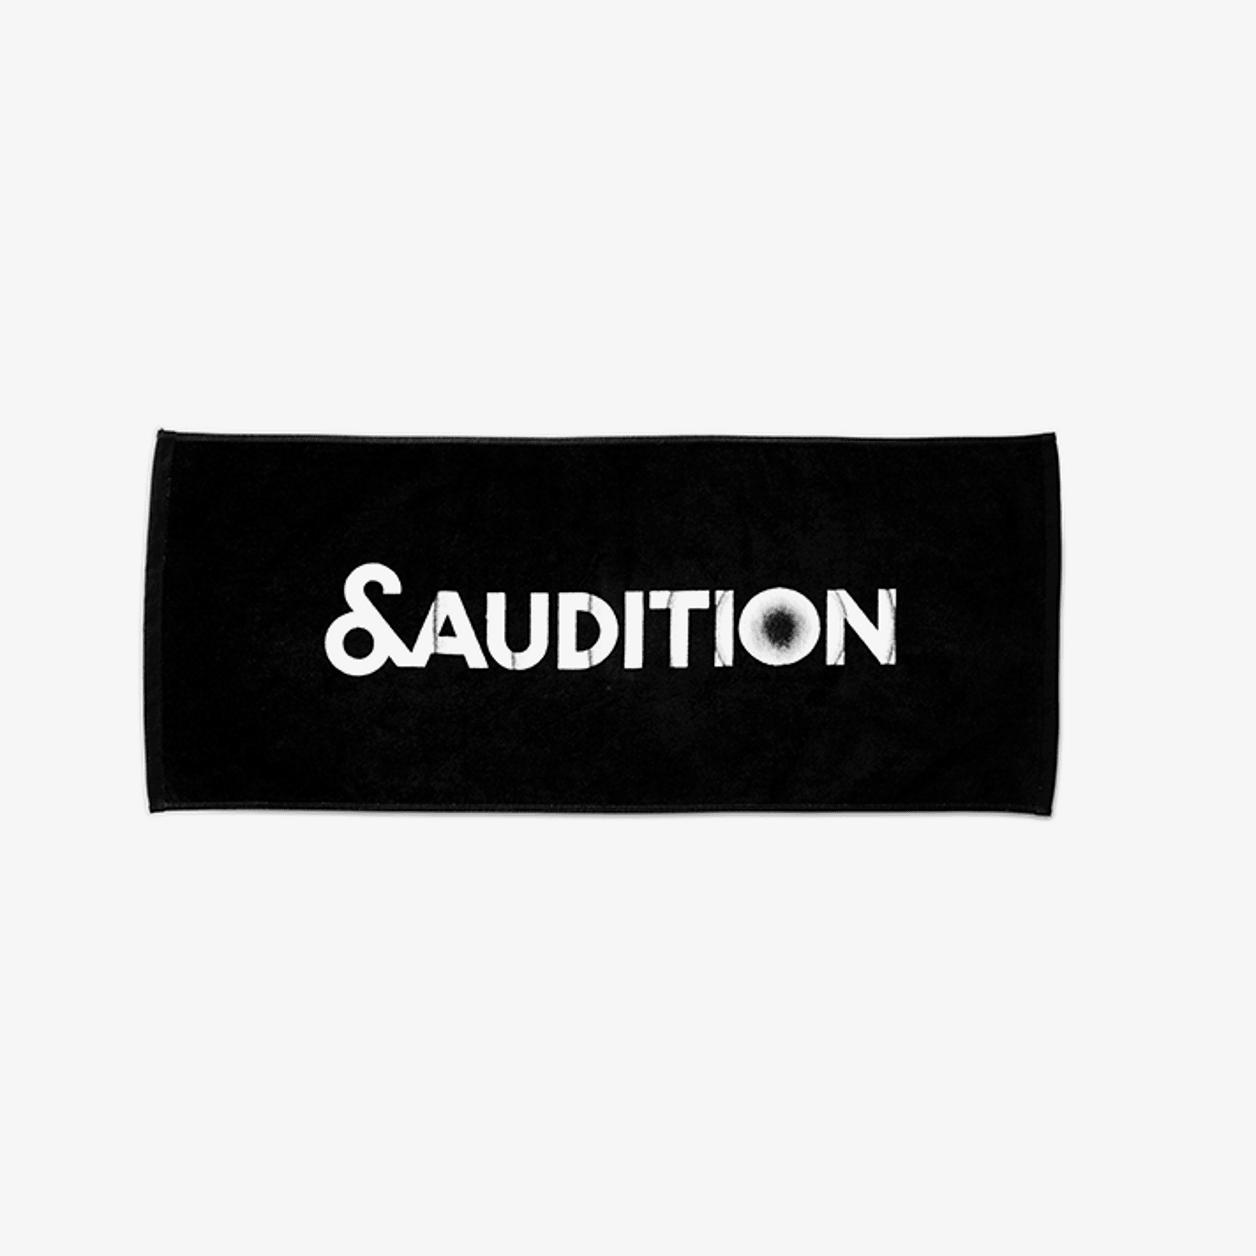 &AUDITION Towel